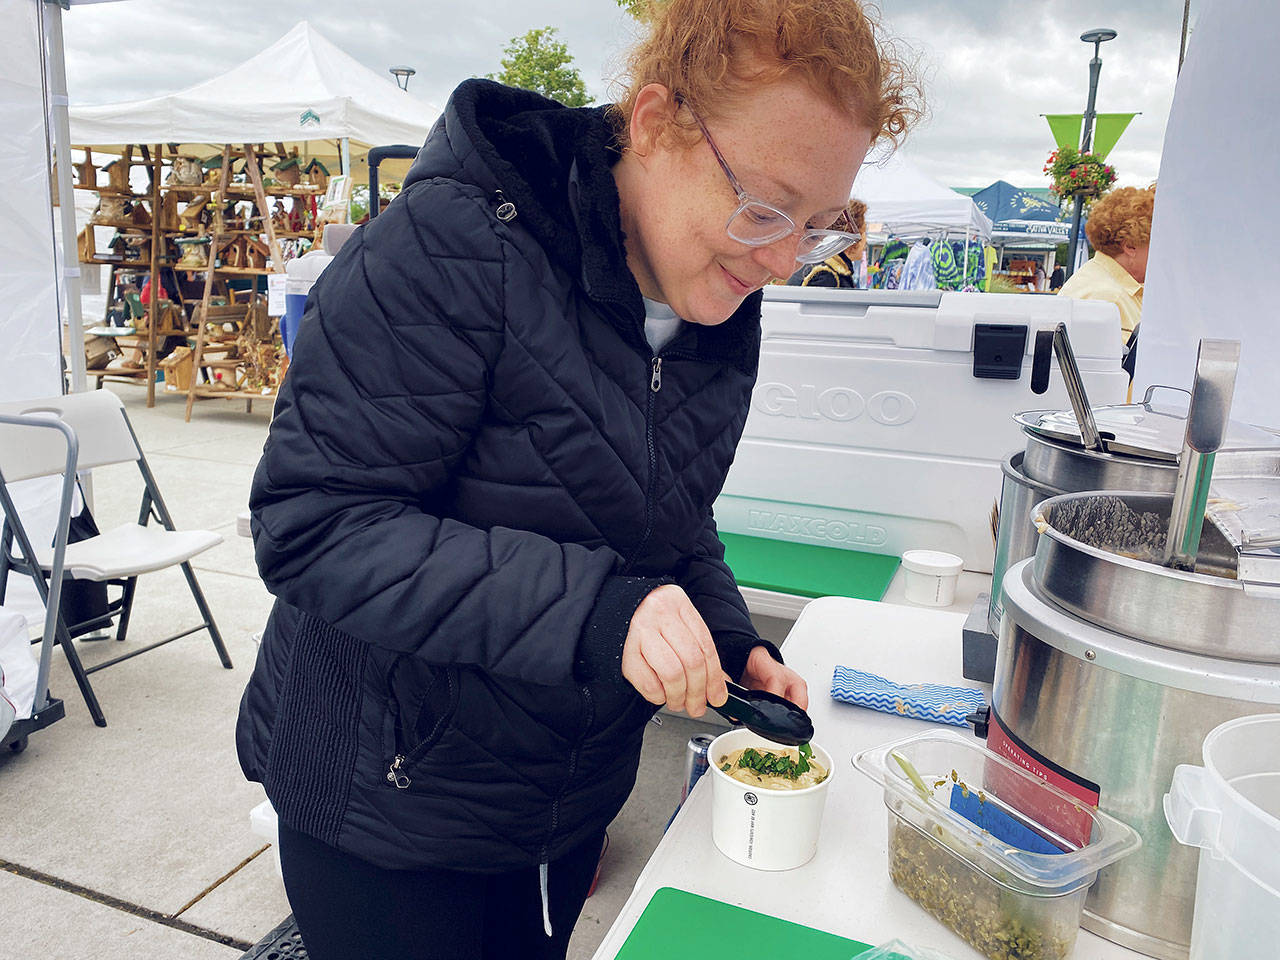 Charity Brock, head chef and owner of Red’s at the Market, offers her signature smoked salmon chowder at the Sequim Farmers & Artisans Market this summer. Photo by Emma Jane “EJ” Garcia